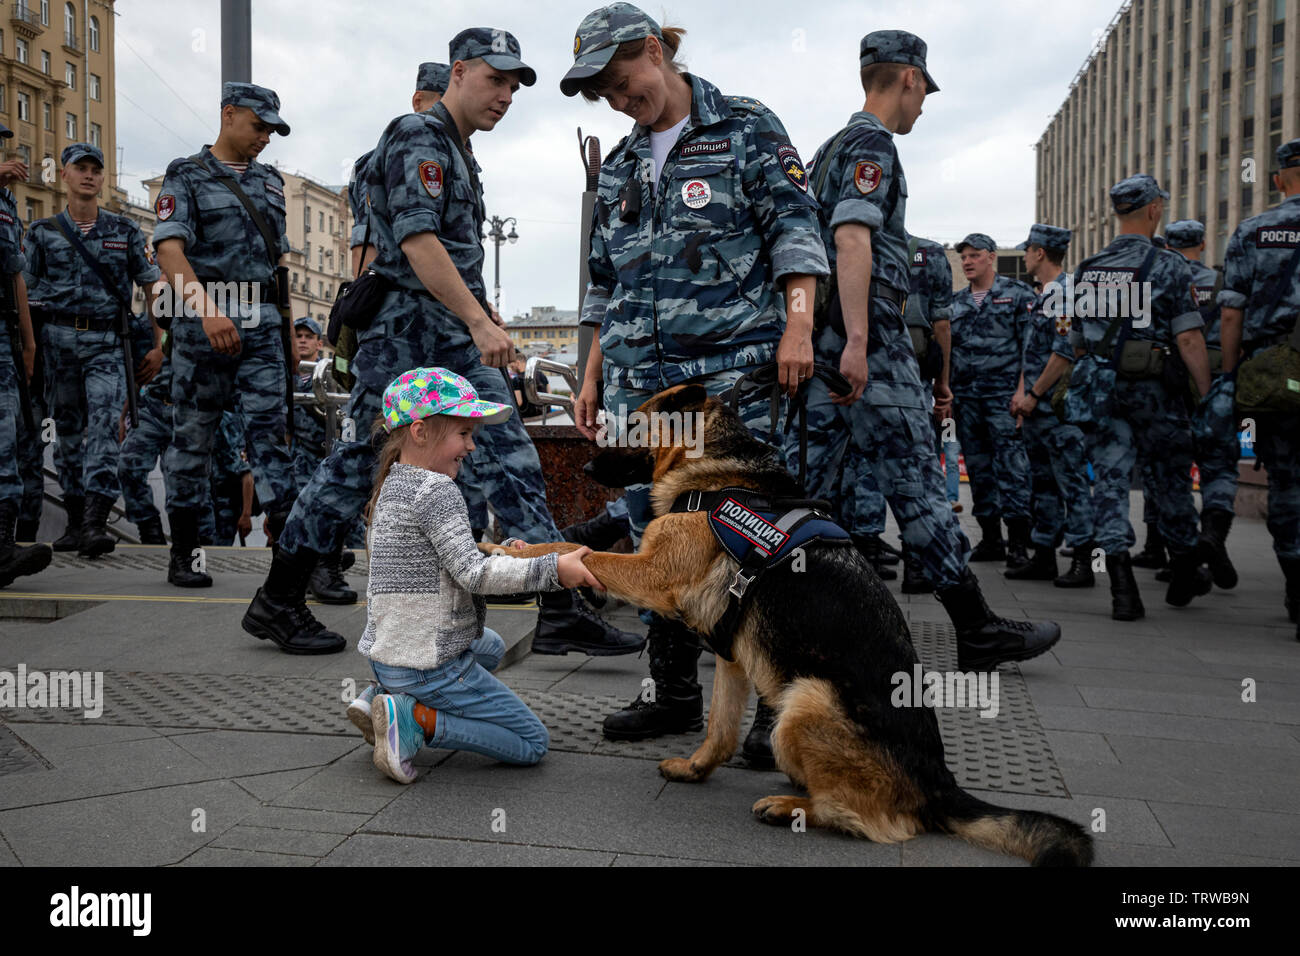 Moscow, Russia. 12th June, 2019 A girl shakes a paw of a police dog on Tverskaya street during an unauthorized opposition rally in Moscow,, Russia Stock Photo